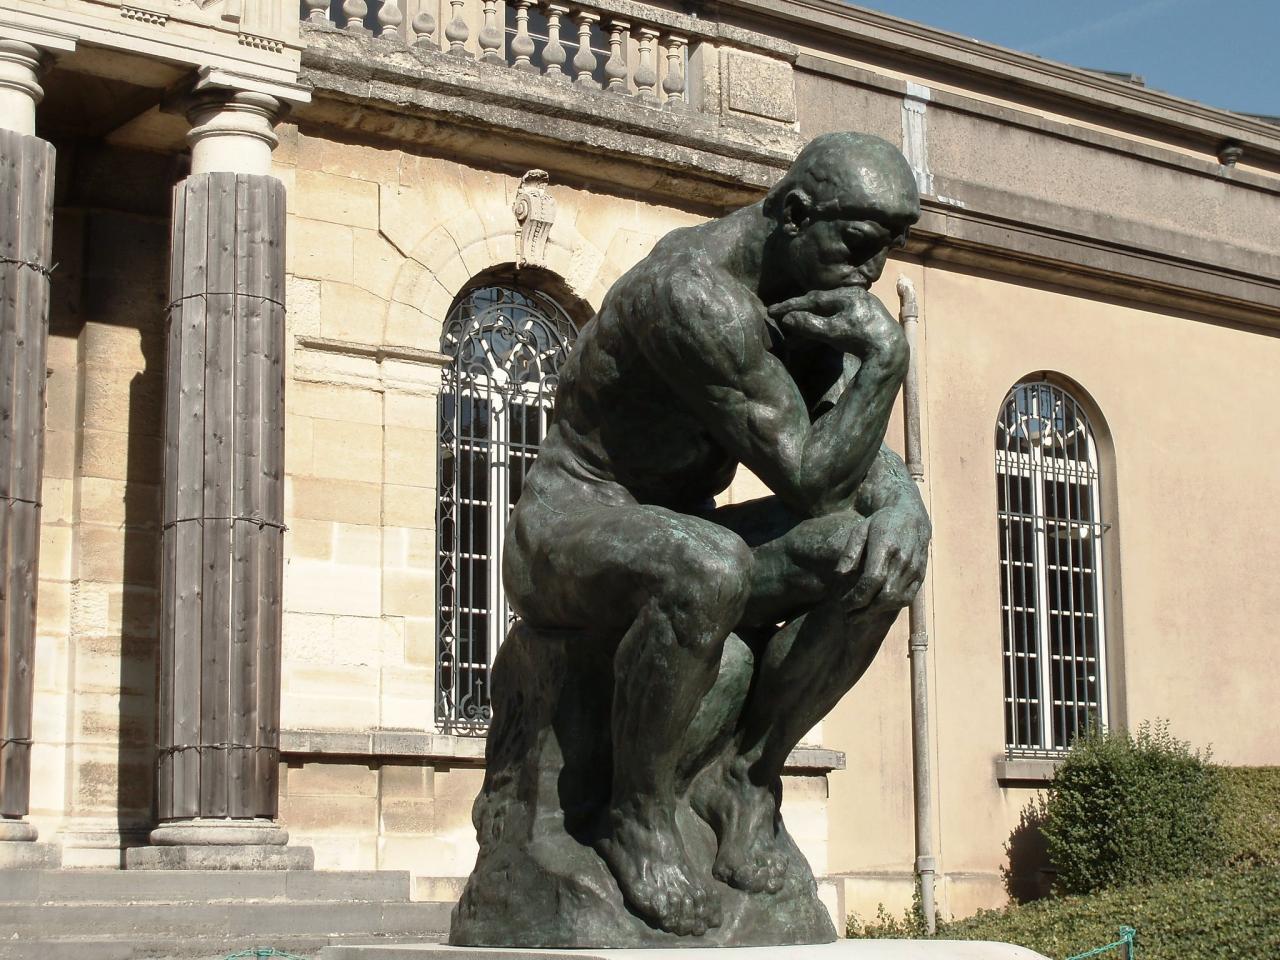 The Museum Rodin